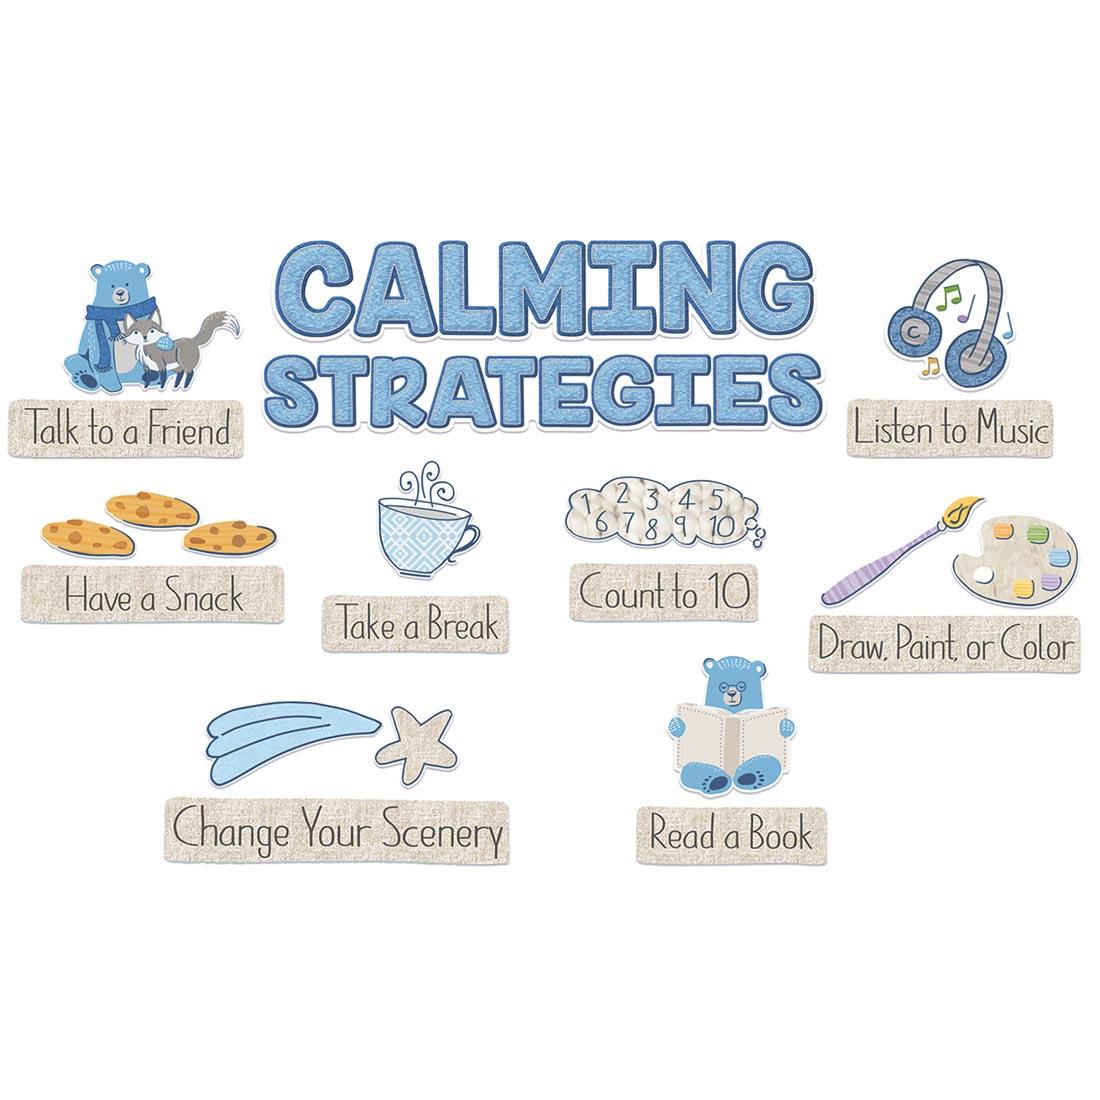 Calming Strategies Mini Bulletin Board Set from A Close-Knit Class collection by Eureka